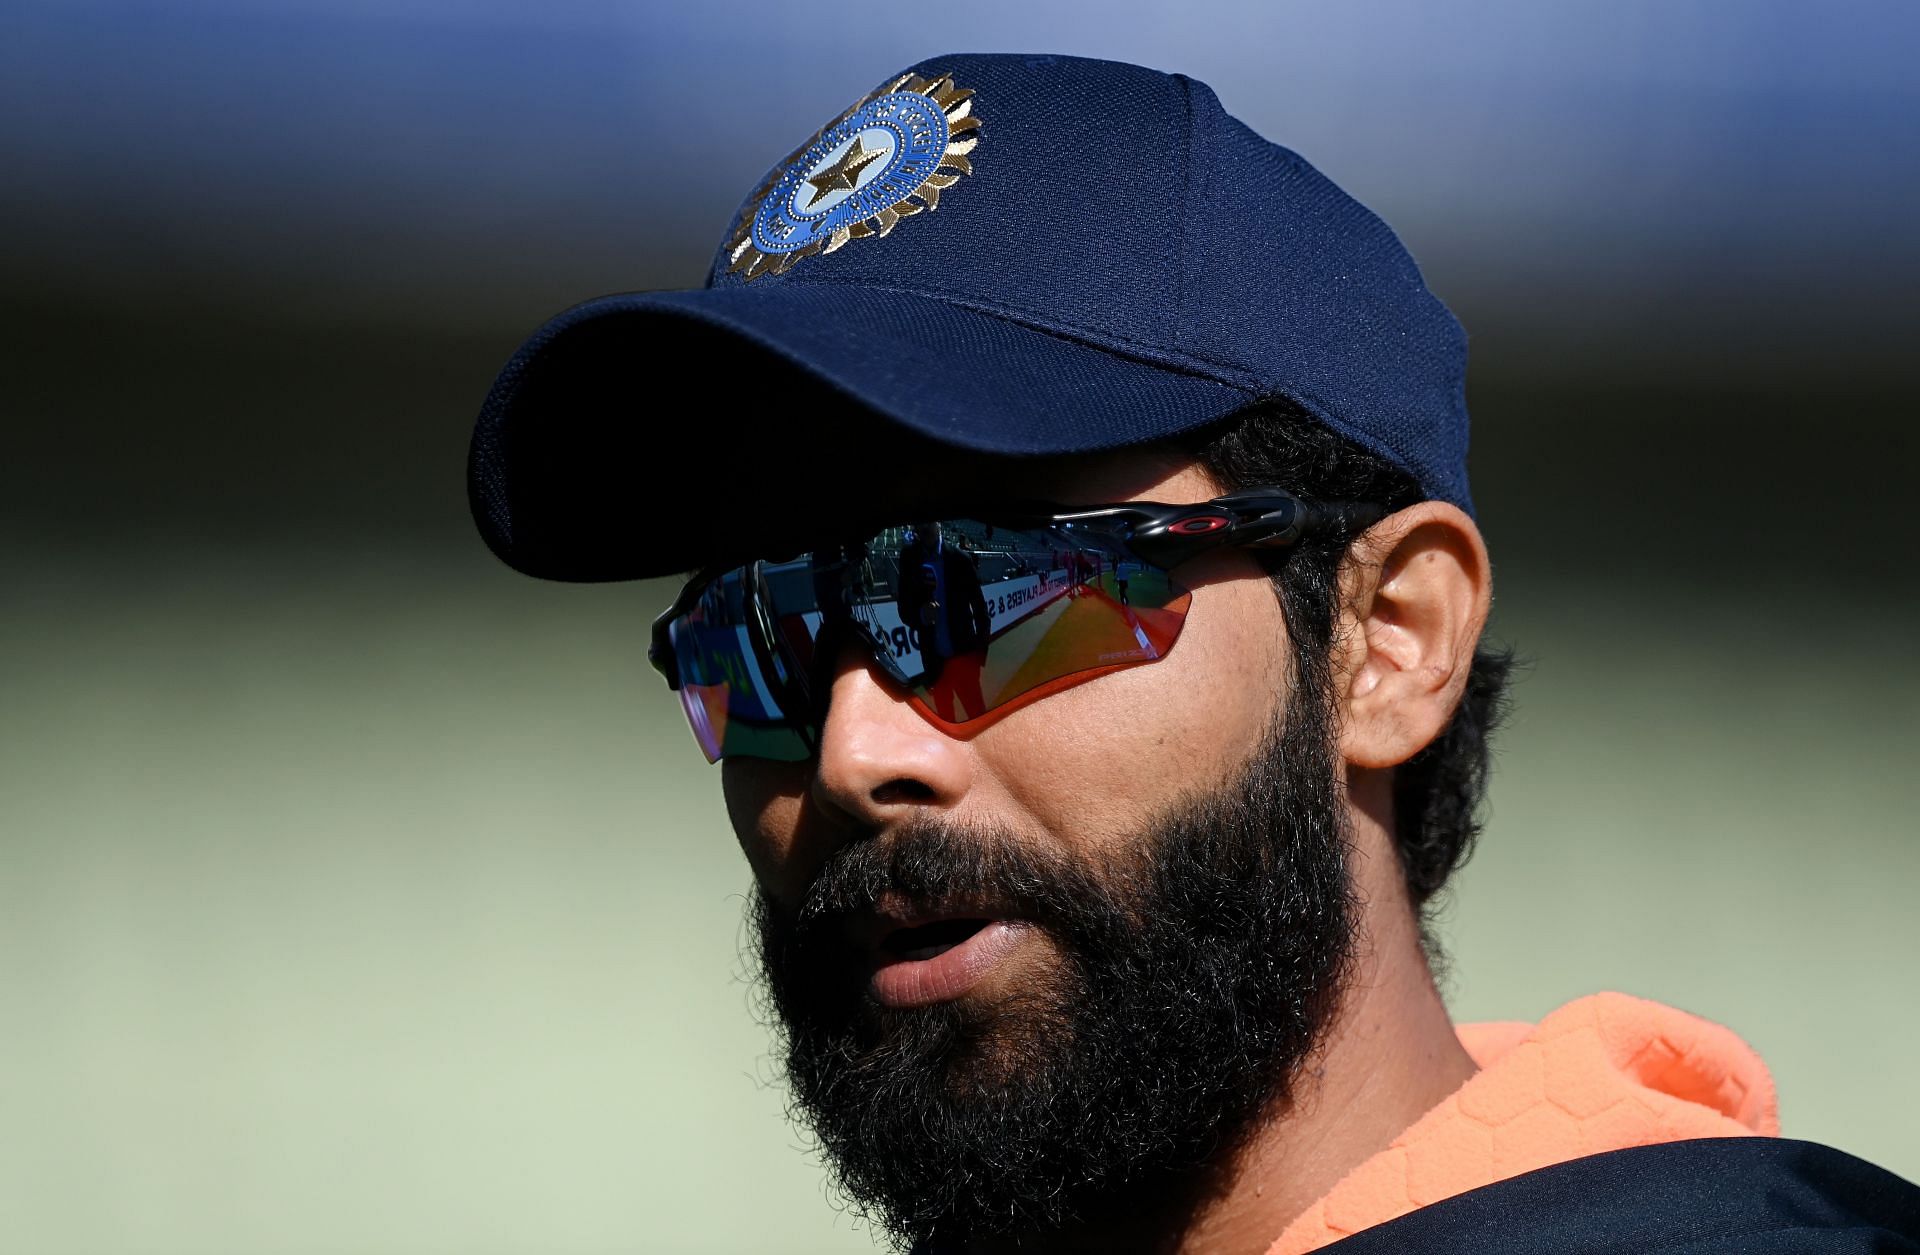 Ravindra Jadeja has clarified that the IPL was not on his mind when he came out to play in Birmingham (Image courtesy: Getty)